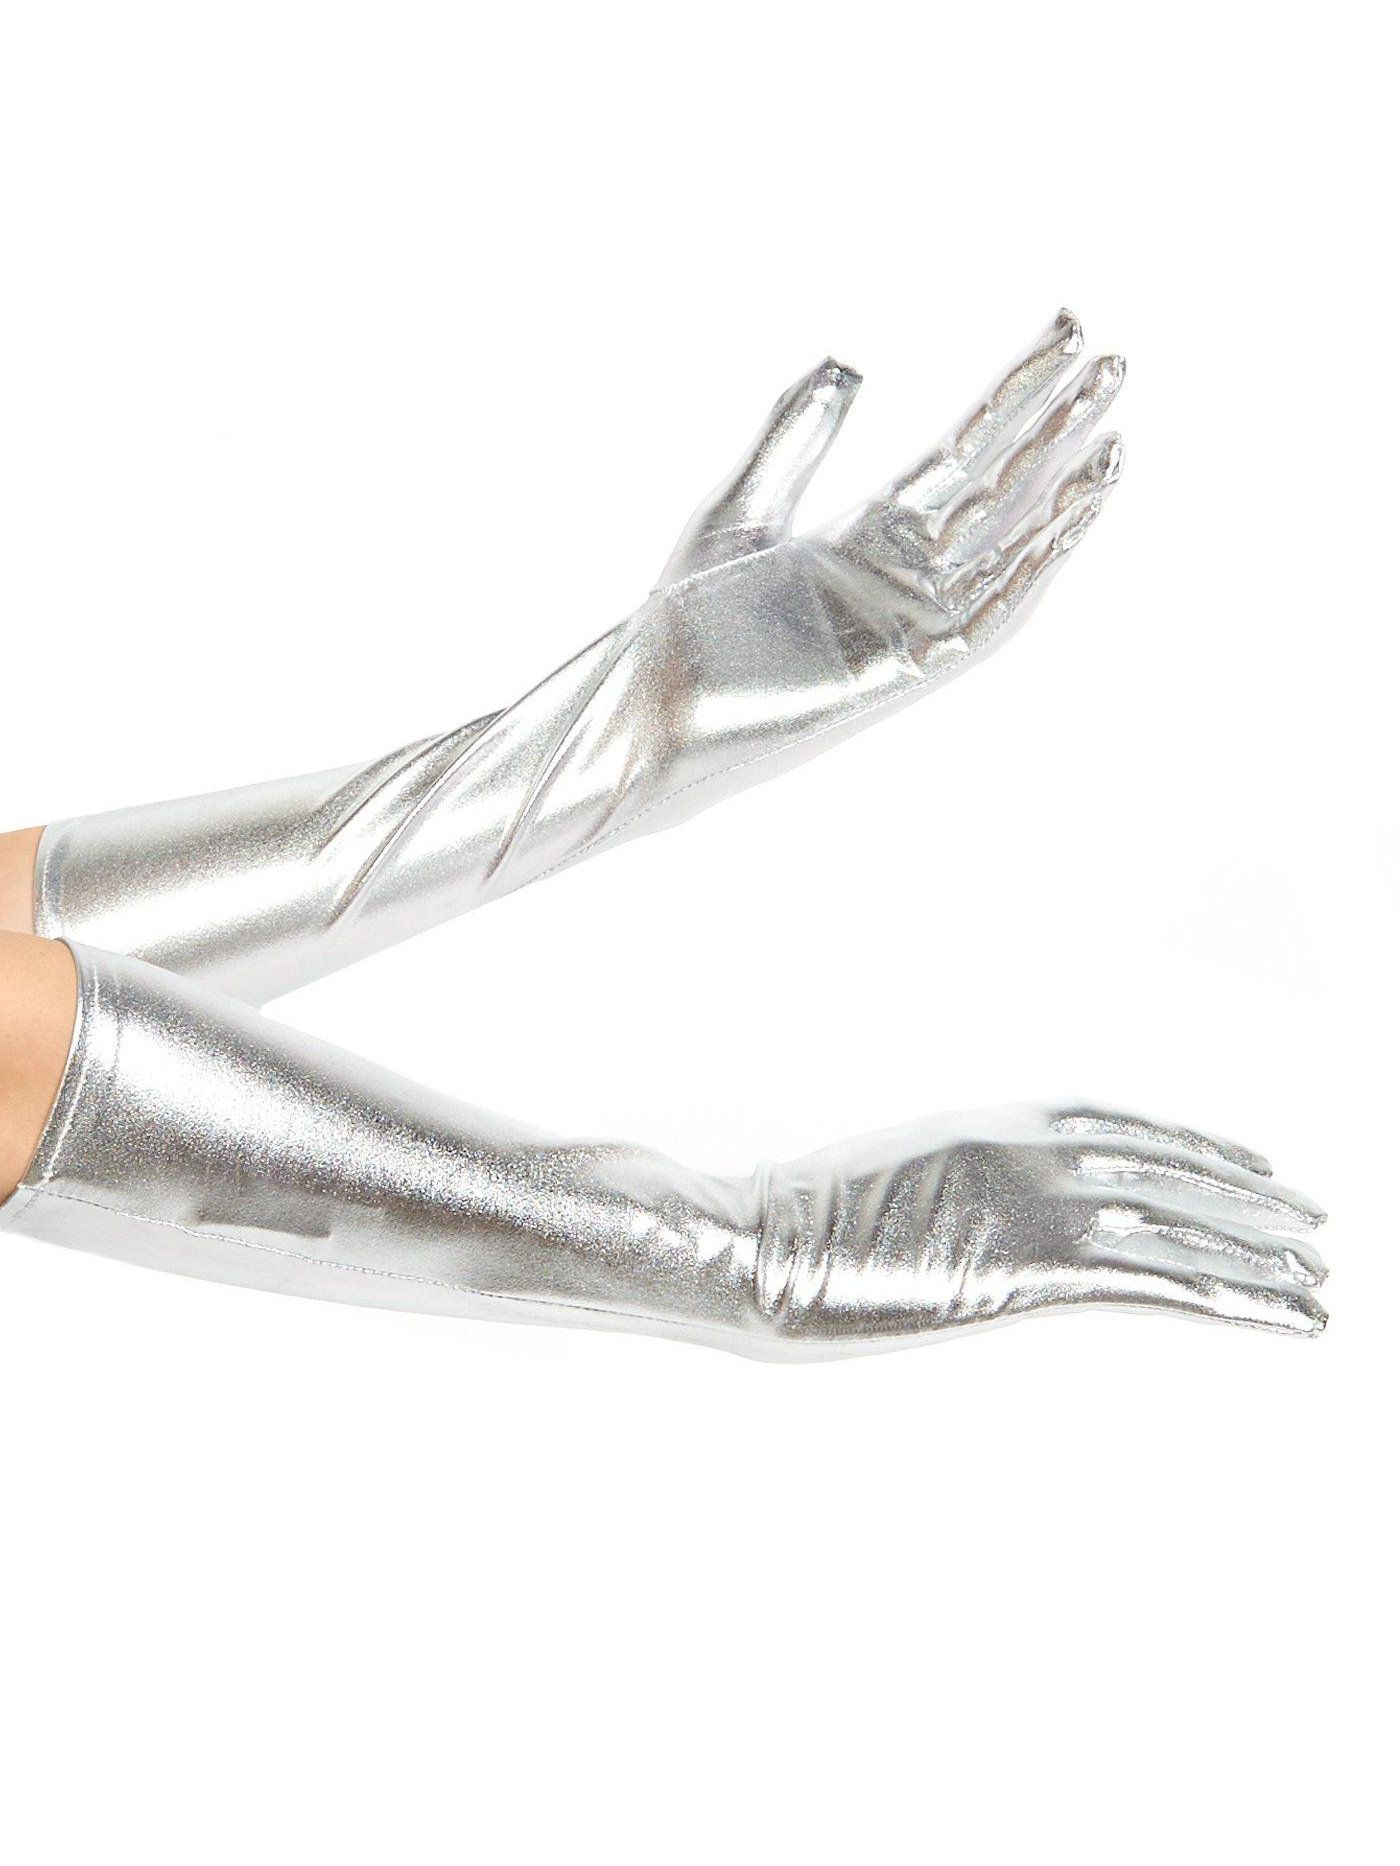 Women's Silver Lame Gloves - costumes.com